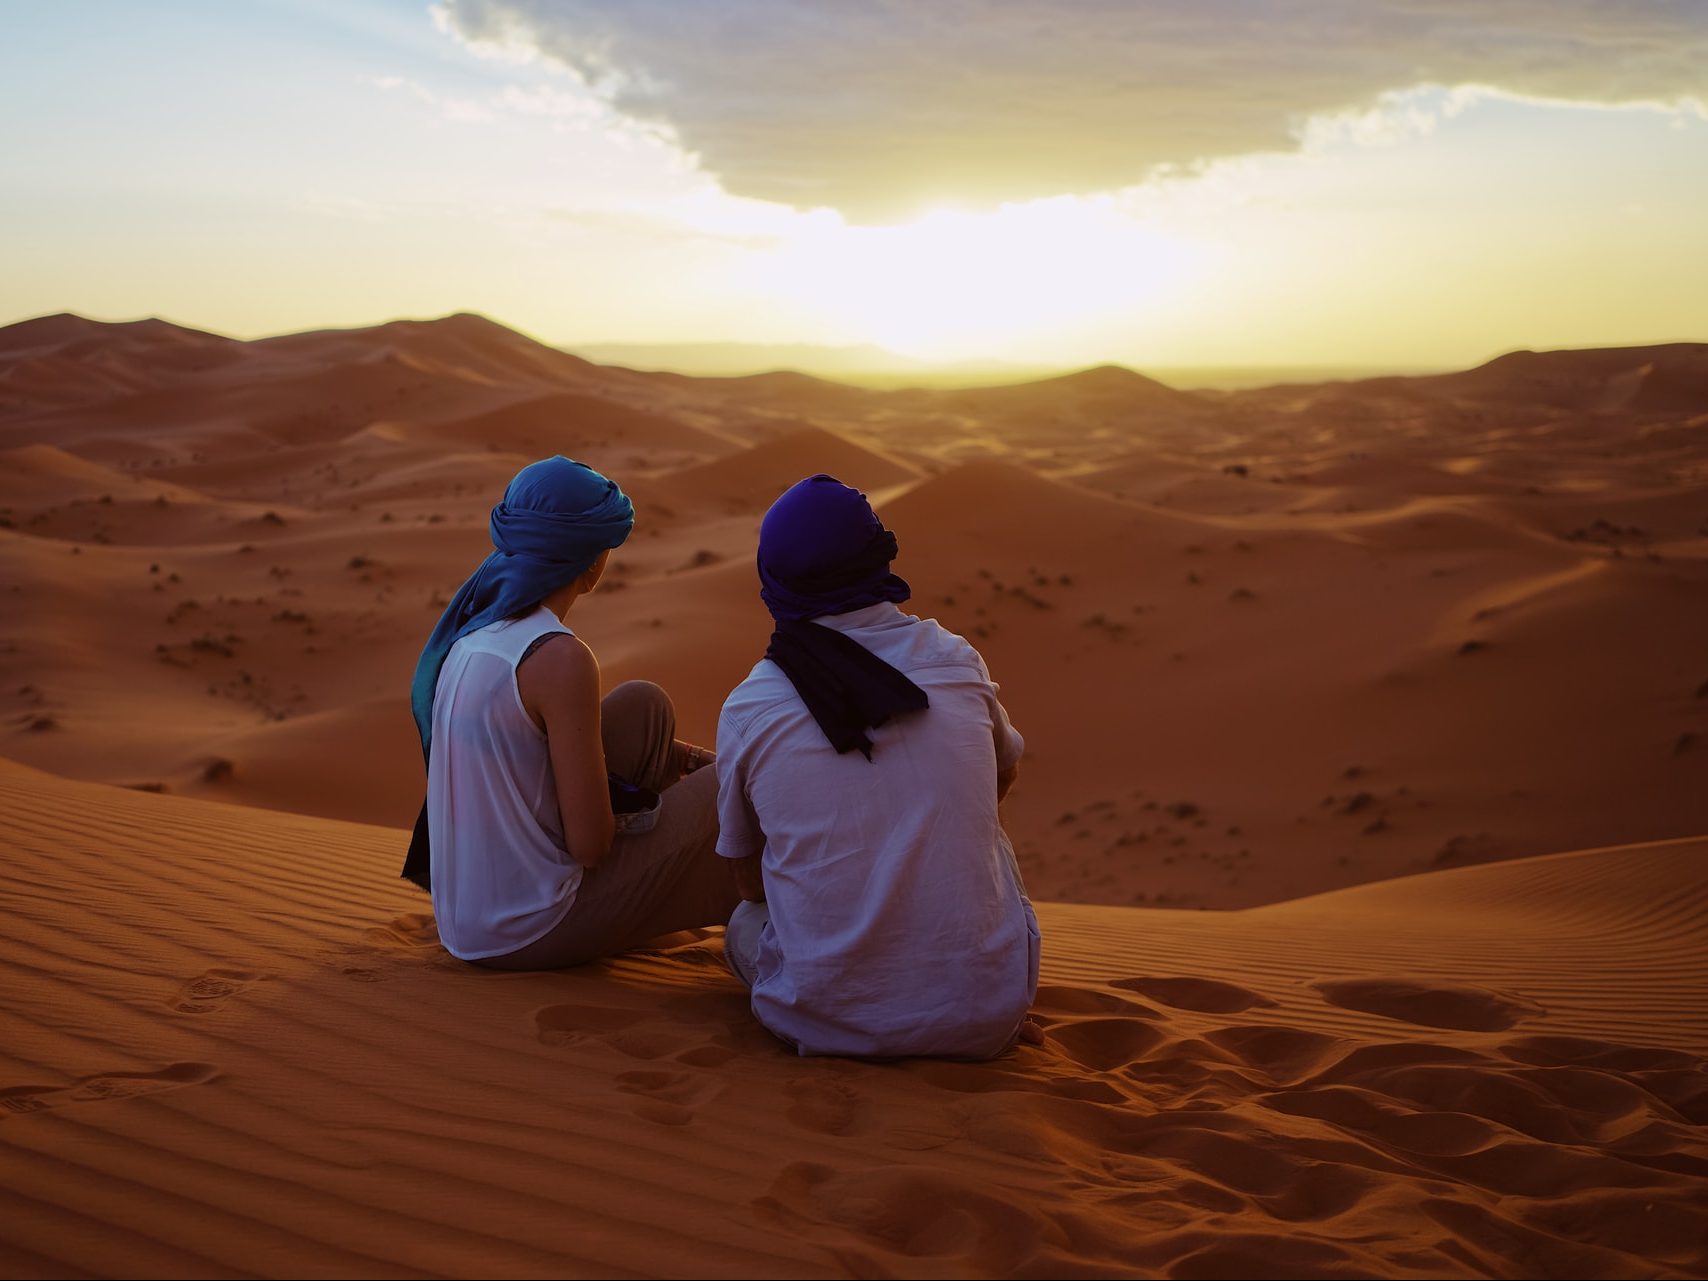 Man and woman with head gear looking at a sunset over a desert in Morocco.